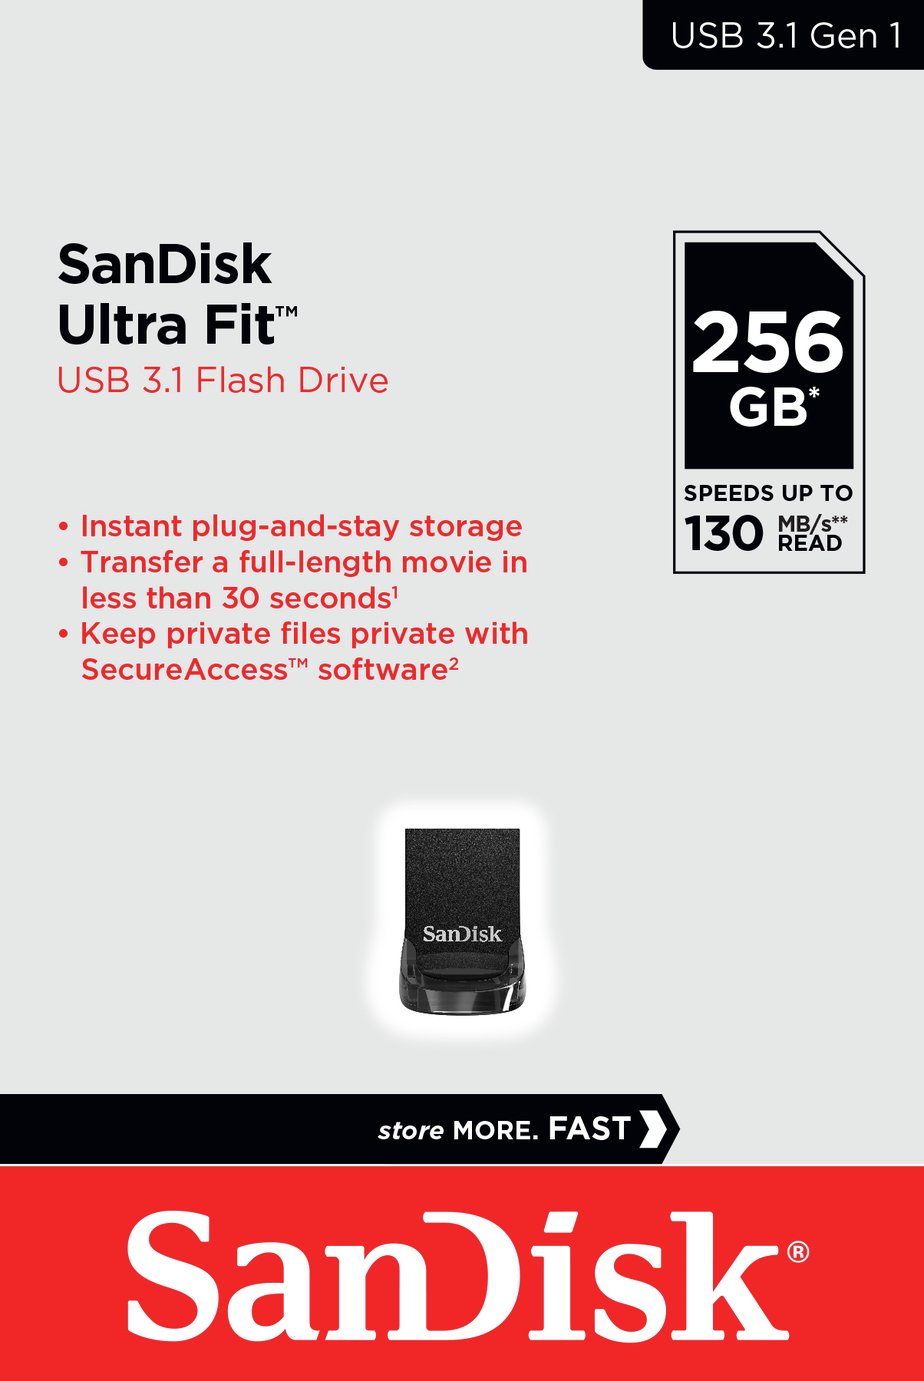 SanDisk Ultra Fit USB 3.1 Flash Drive Review